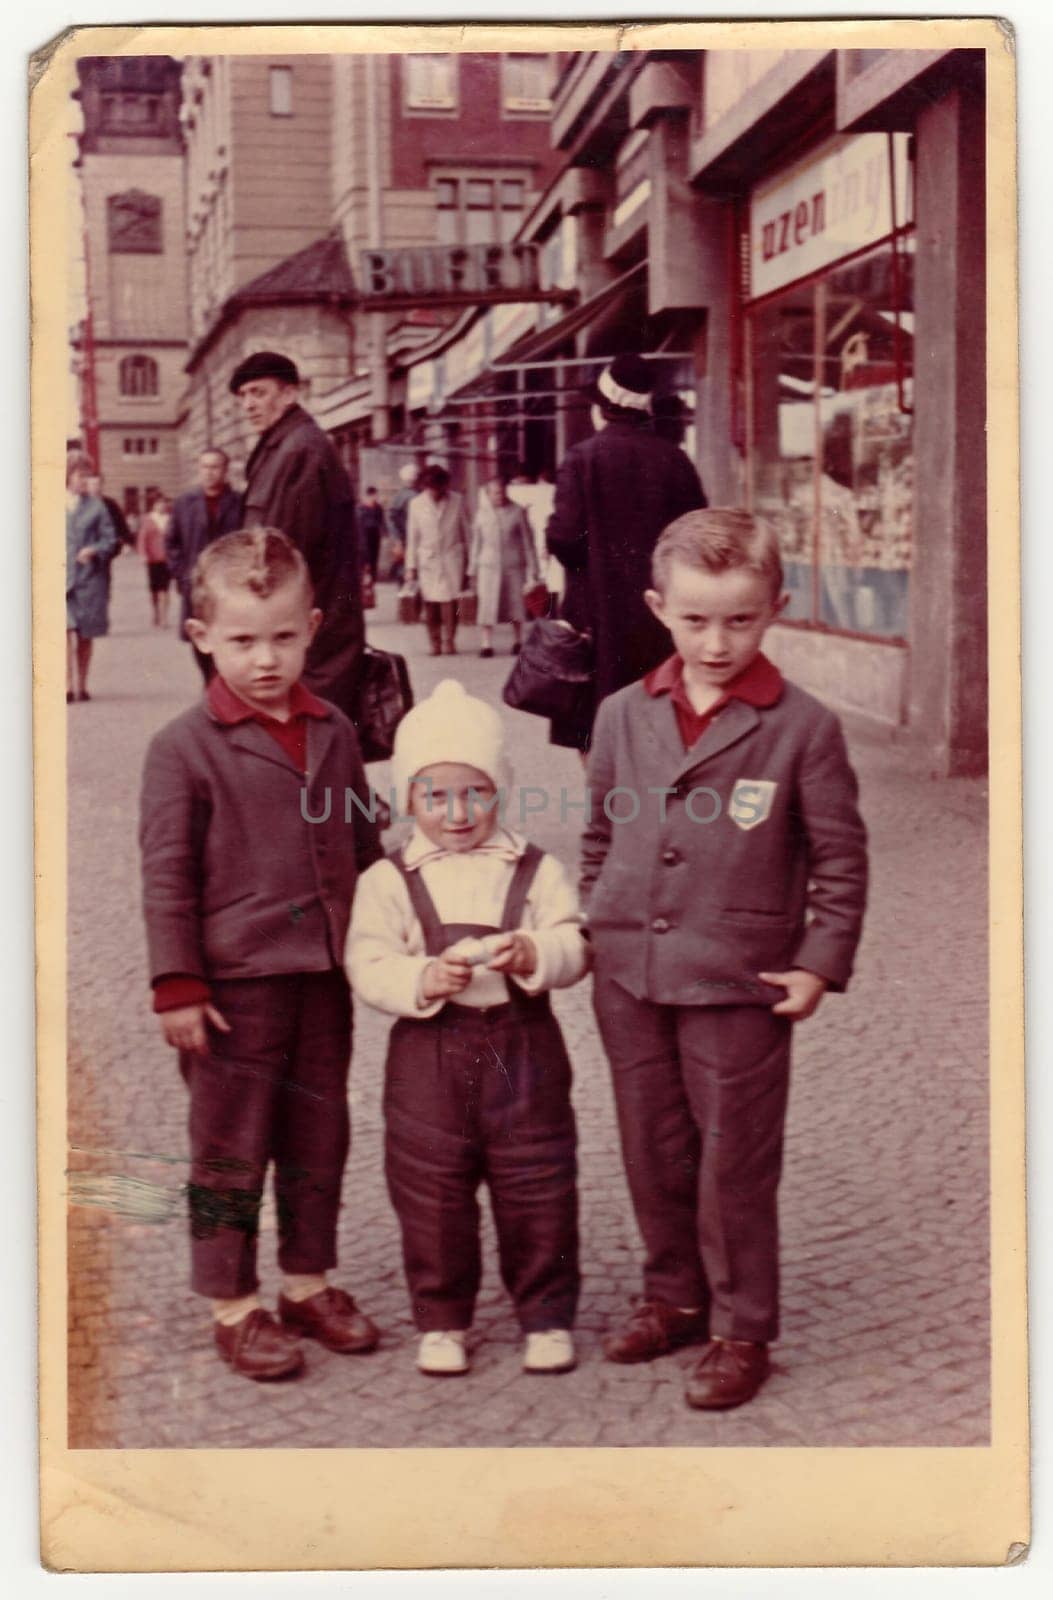 Vintage photo shows children boys pose on the city street. by roman_nerud